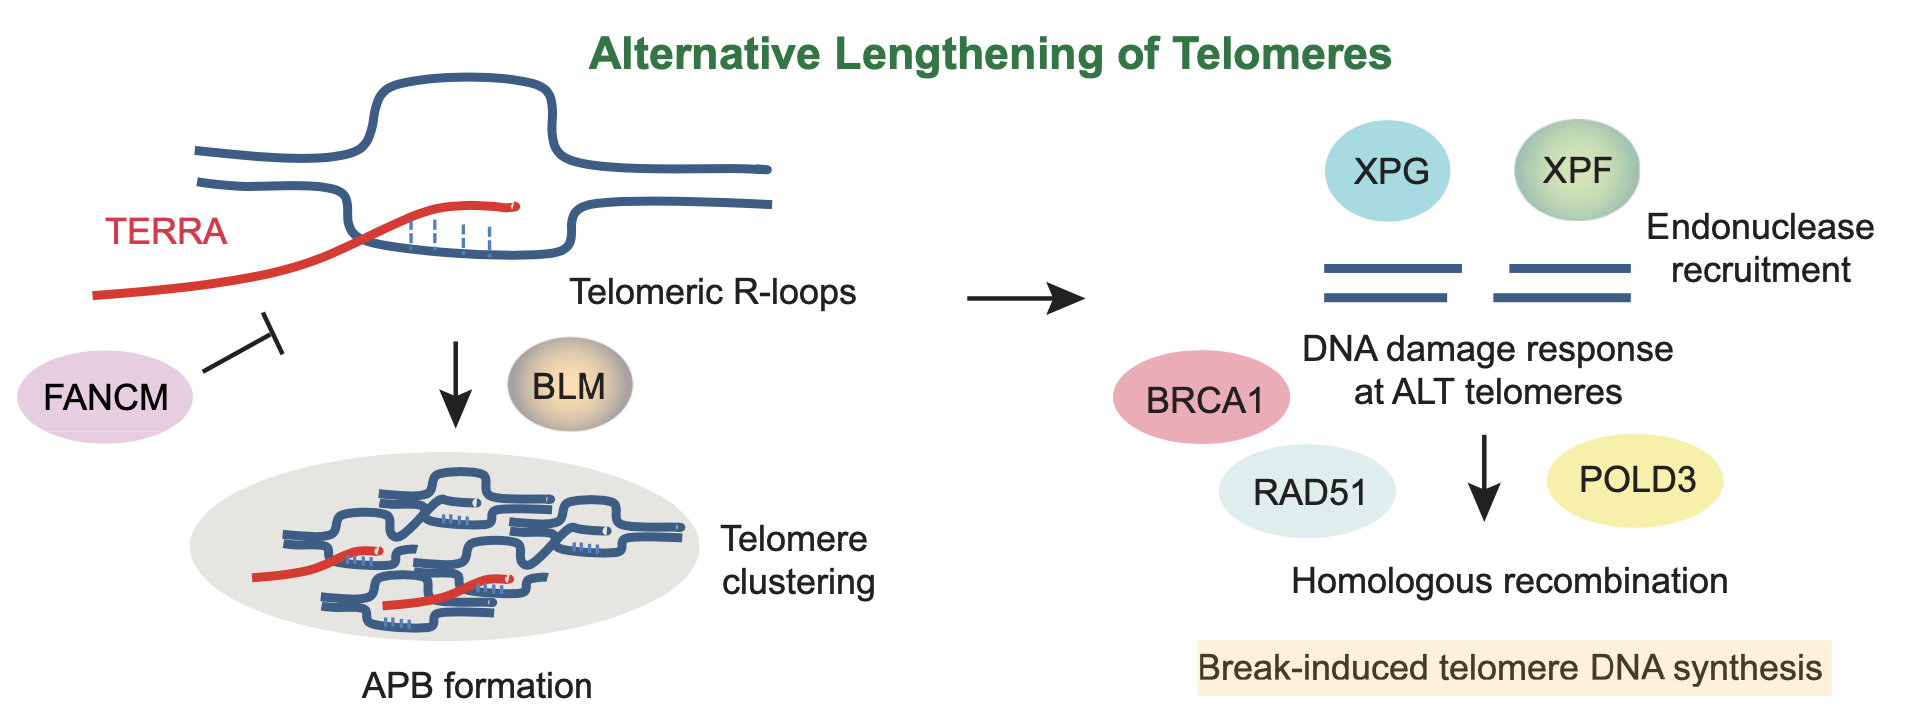 XPF activates break-induced telomere synthesis